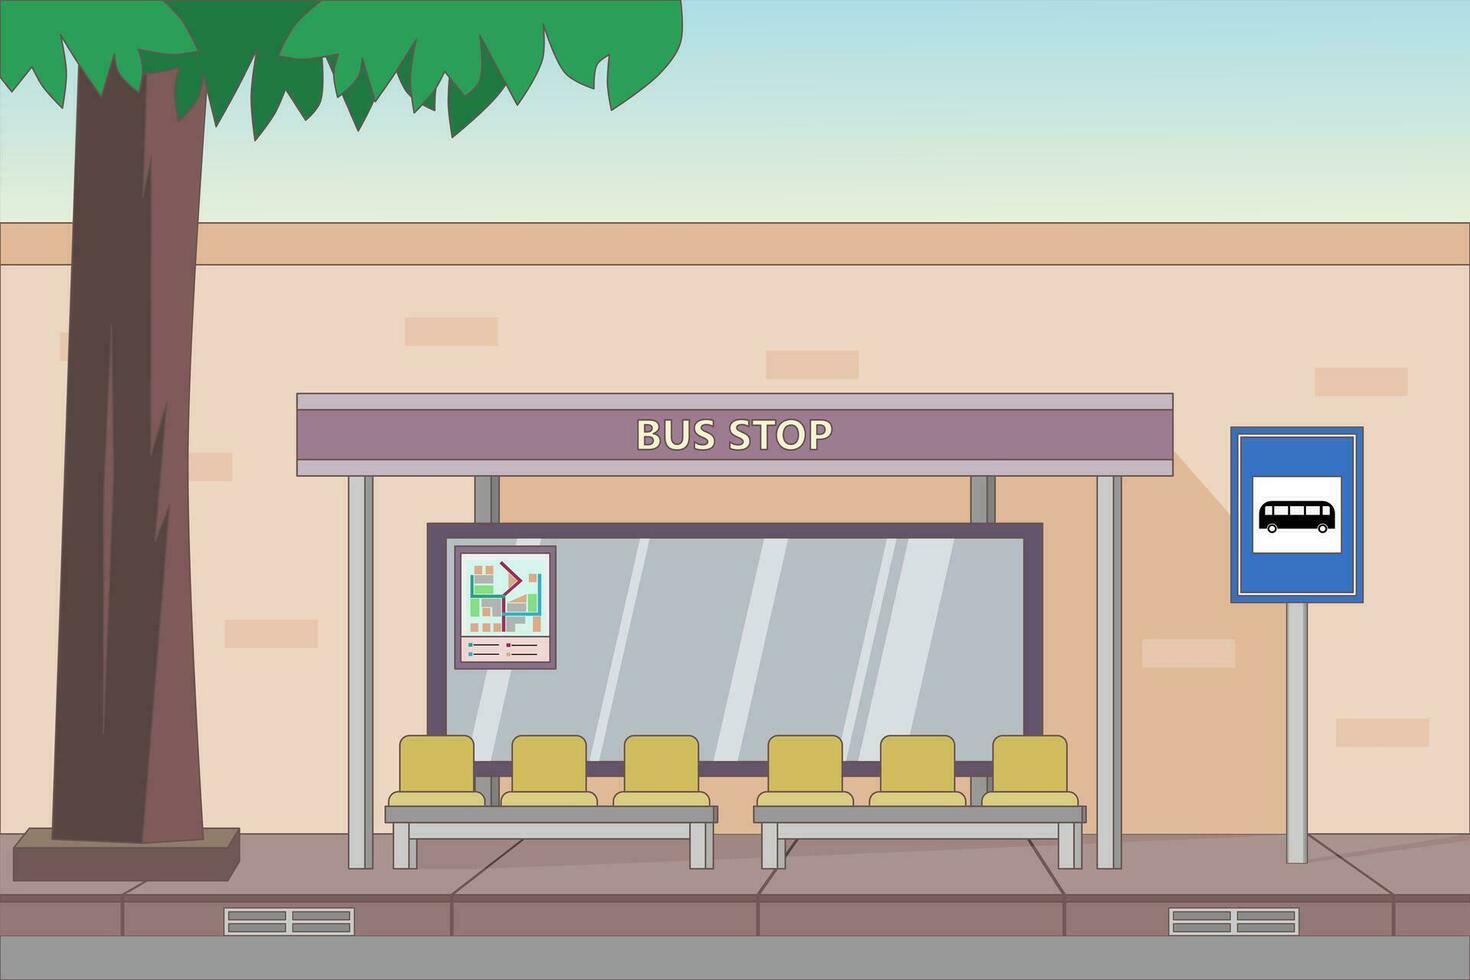 Bus stop with shelter on city street. Urban landscape with public transport station. Vector illustration.